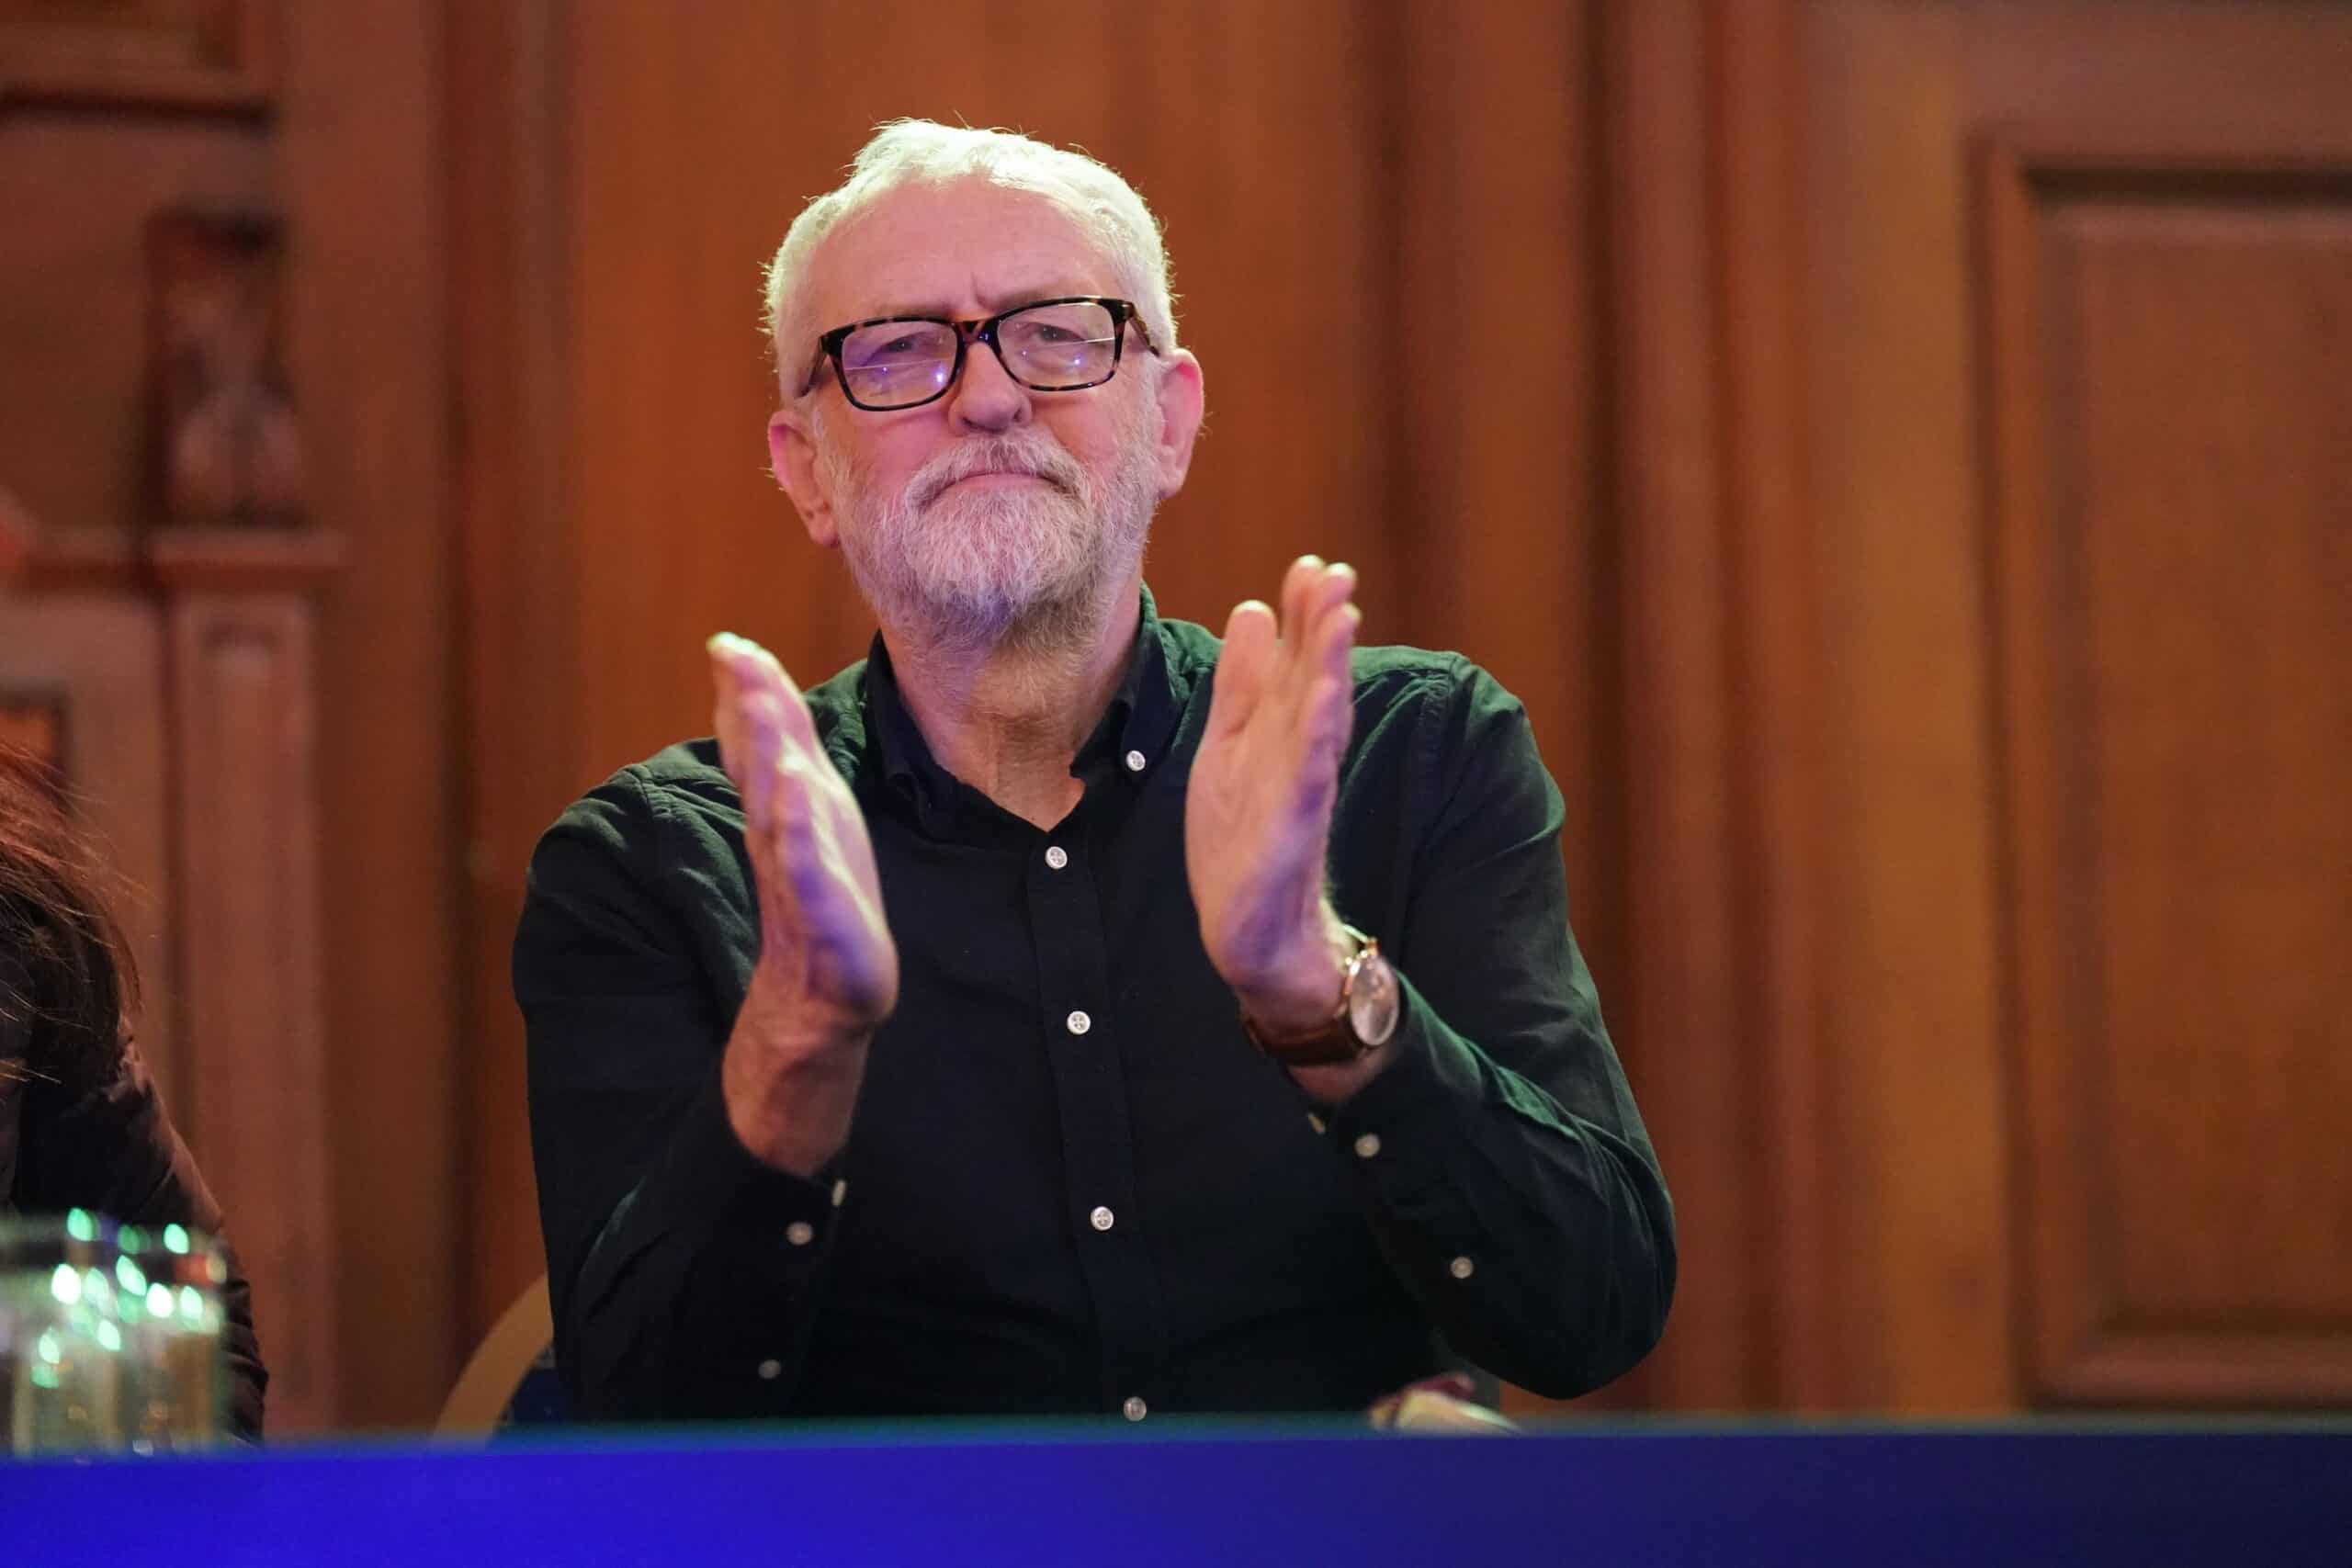 Chatbot infuriates right-wingers after it shows appreciation for Jeremy Corbyn’s genius